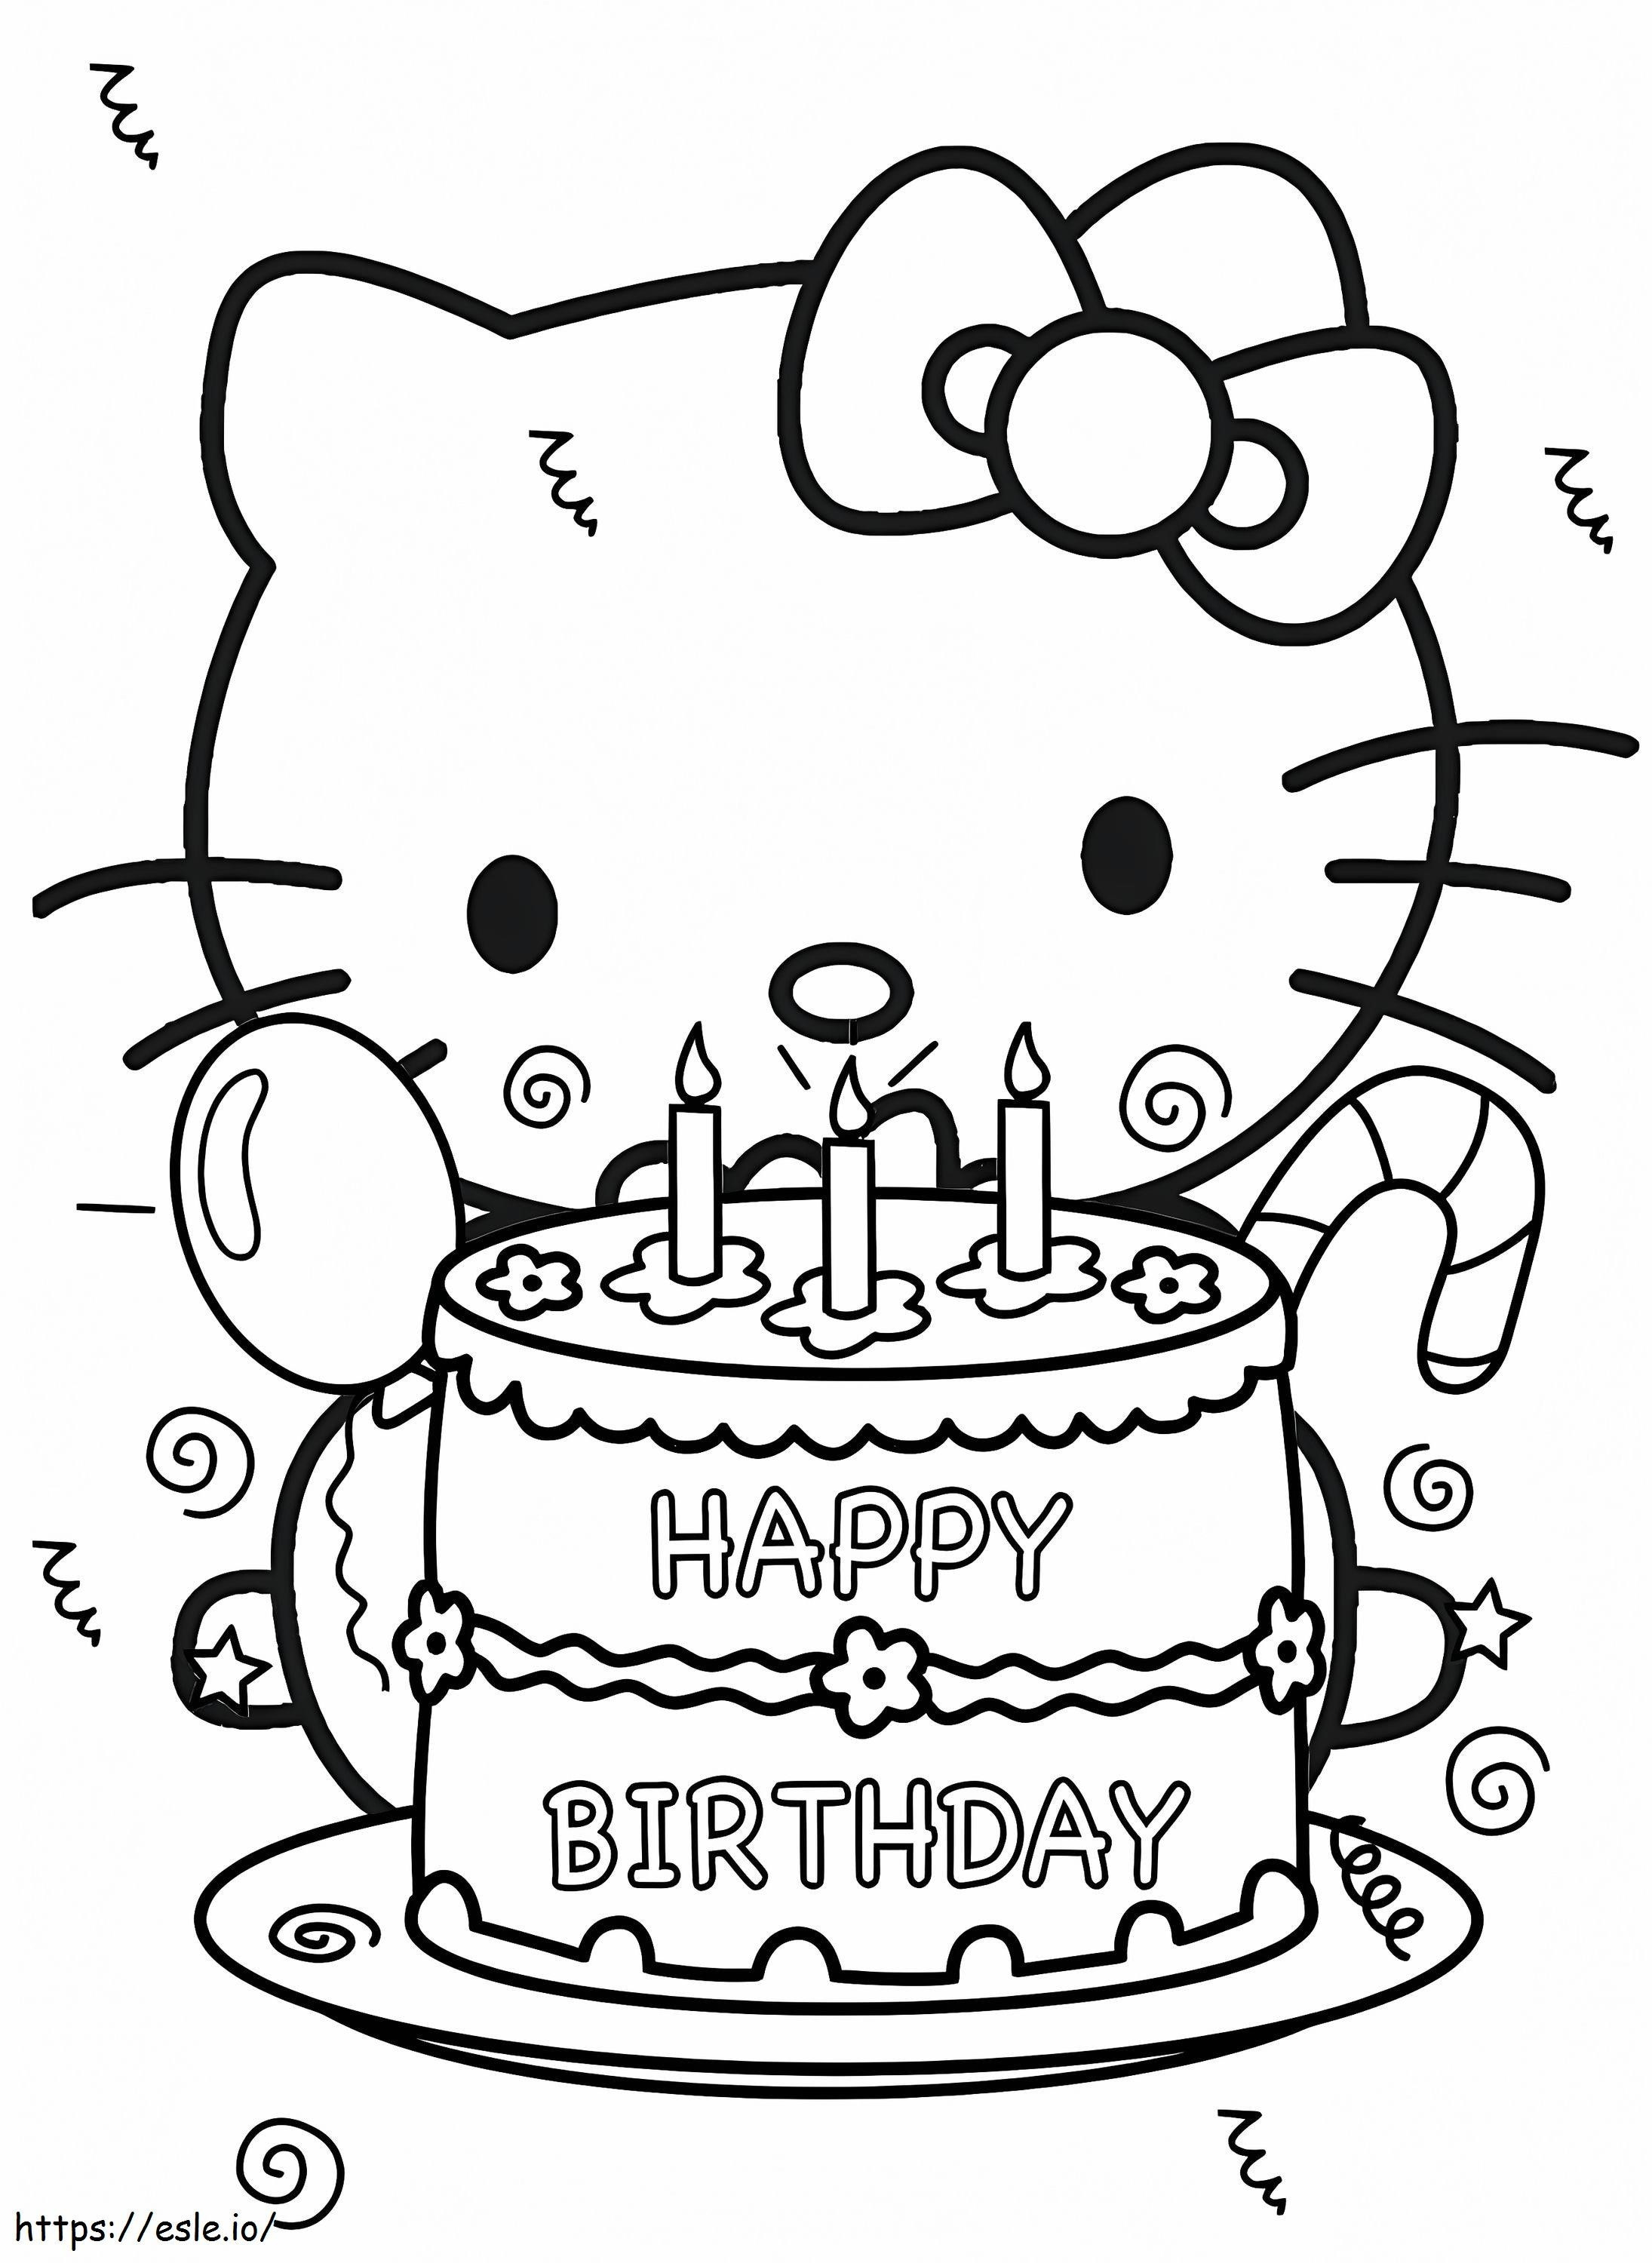 Happy Birthday Hello Kitty coloring page